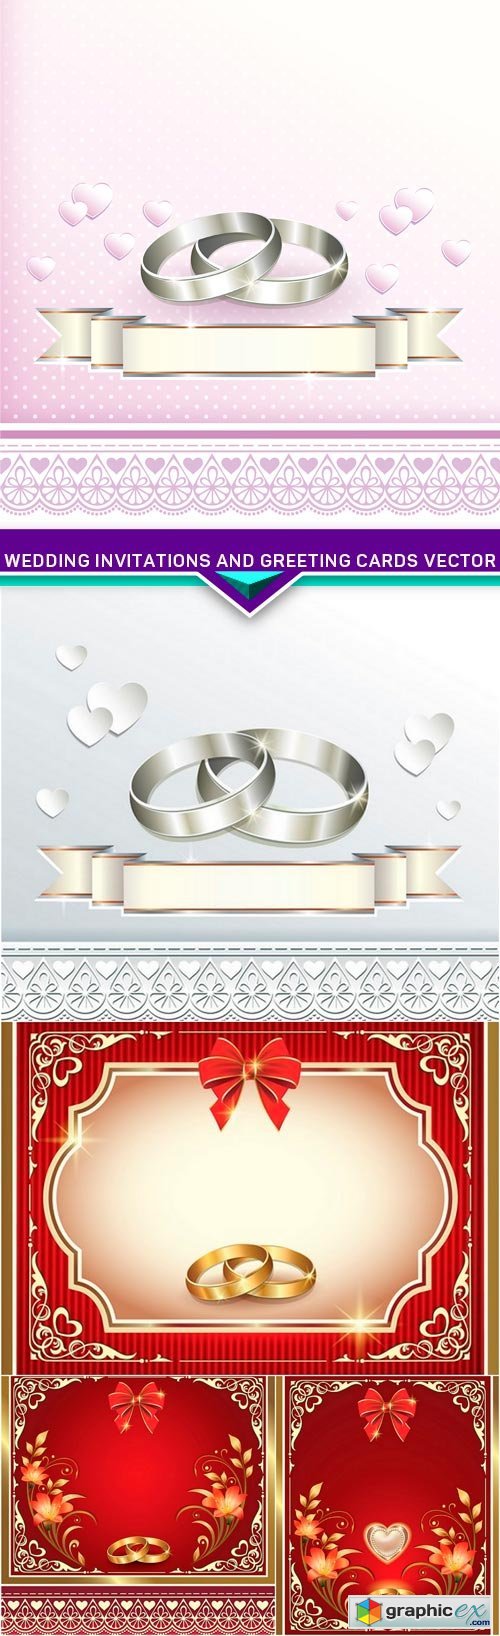 Wedding invitations and greeting cards vector 5X EPS